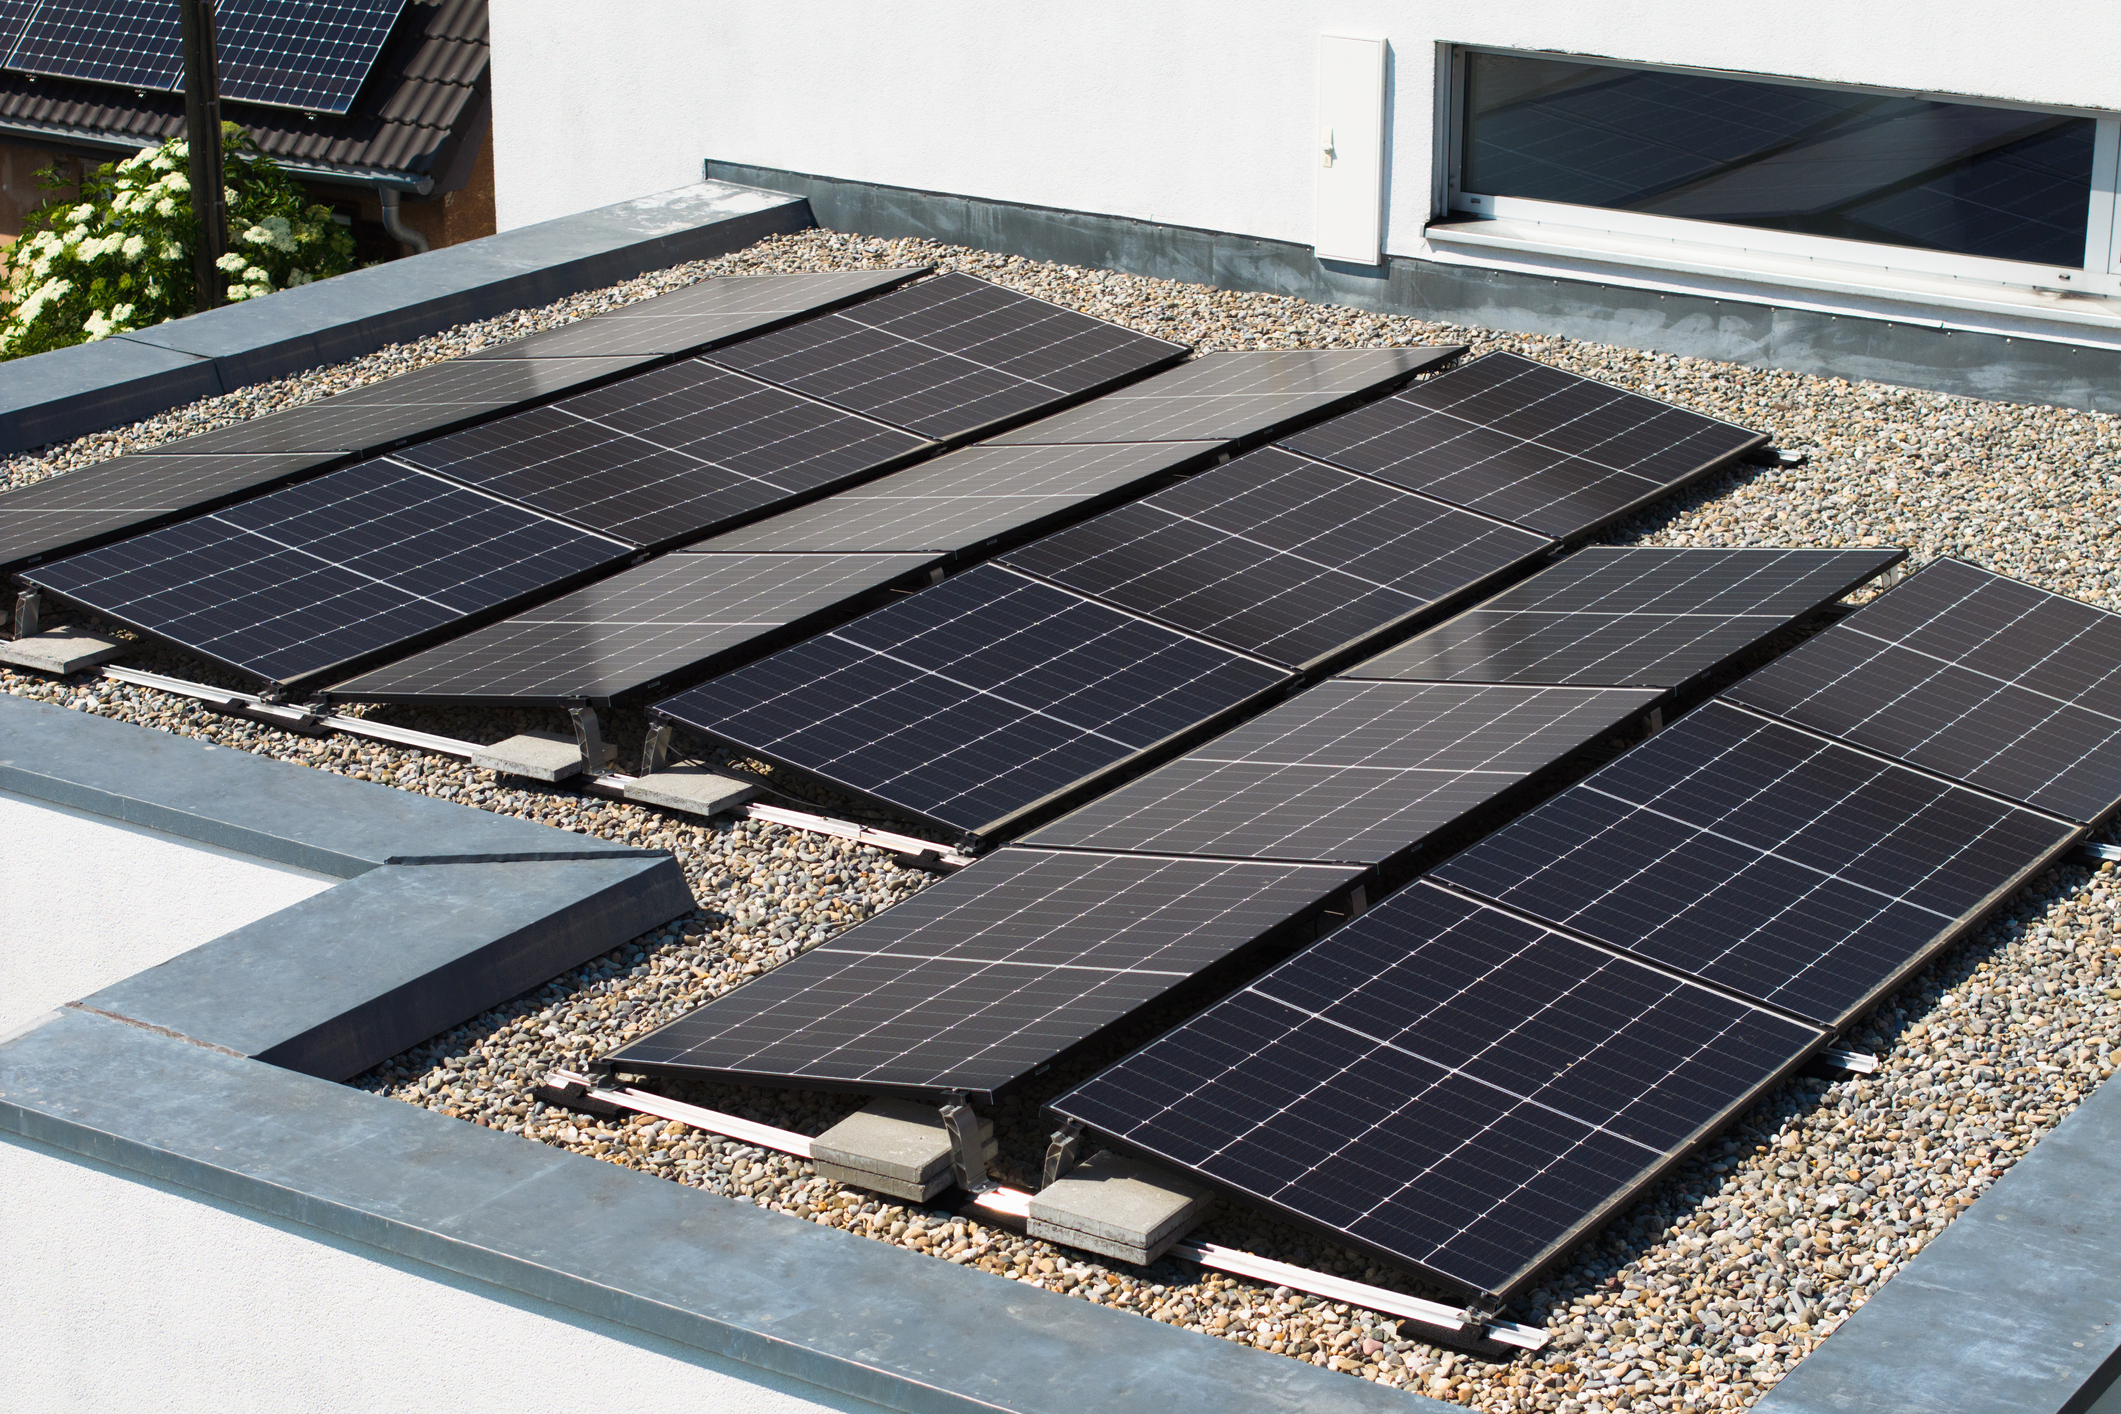 Extended permitted development rights for solar